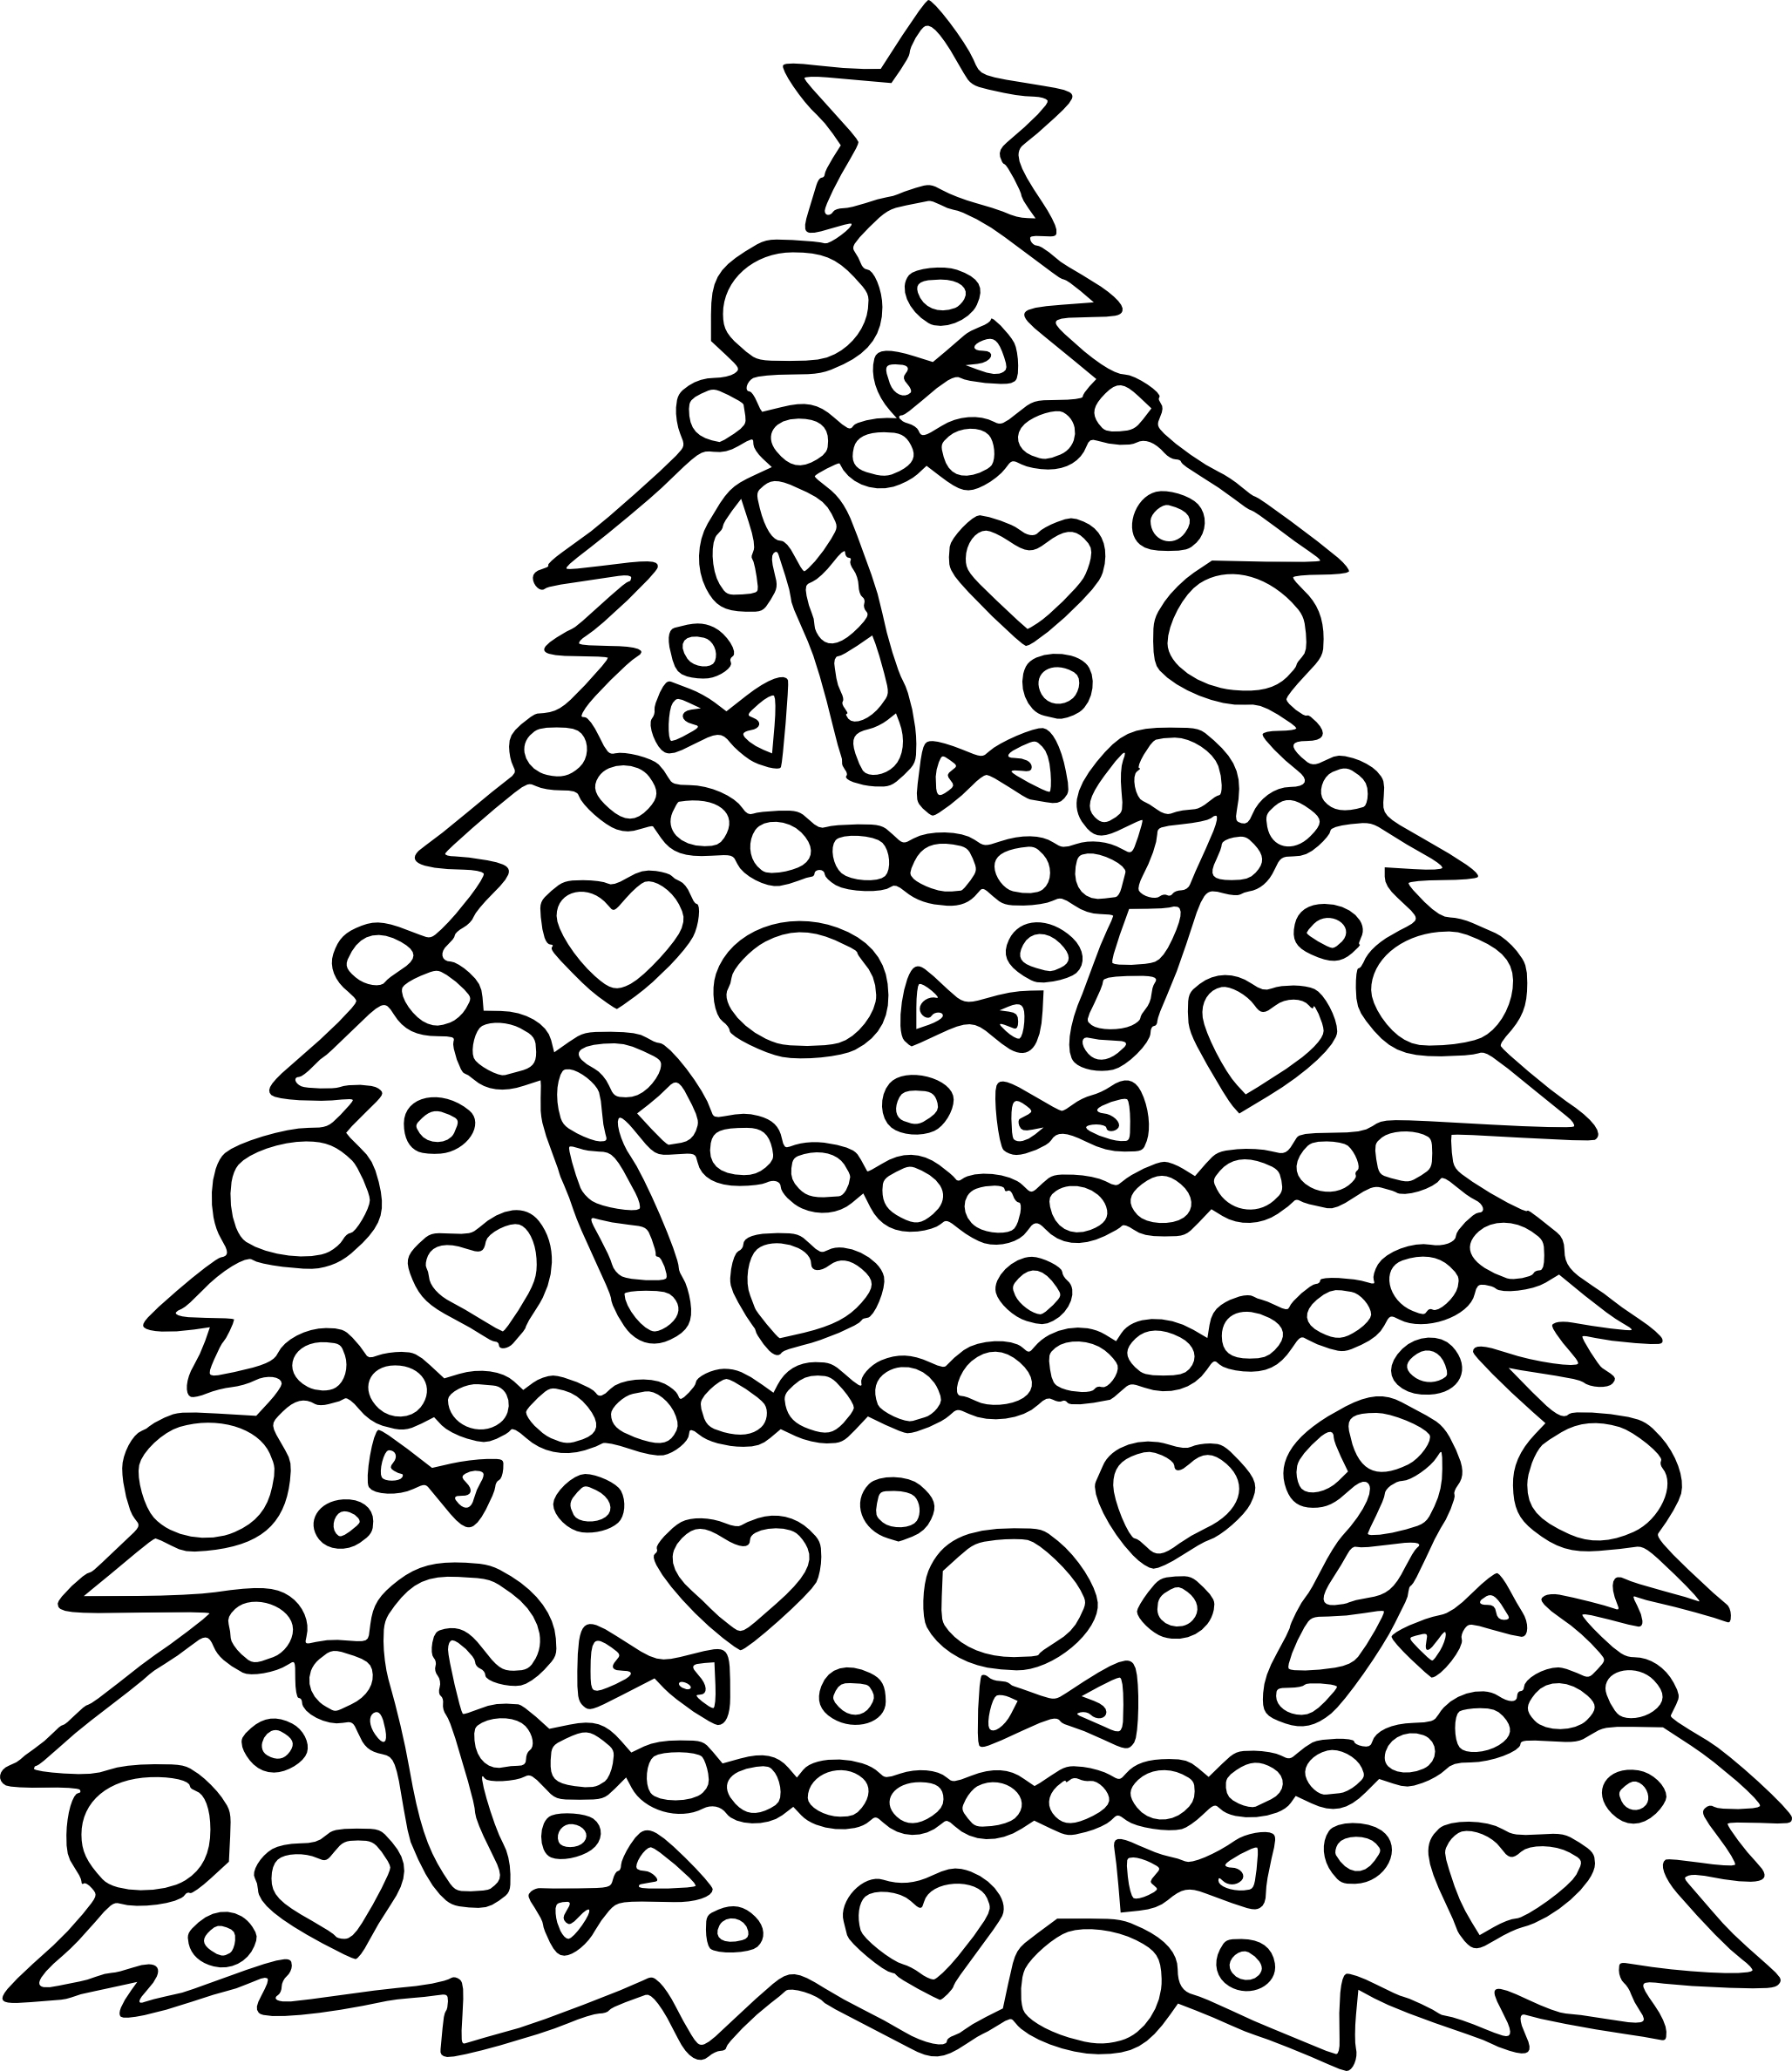 Coloring Pages : B5B68634Eab26F8Ac2Dc1E41Feb8Ee23_Coloring